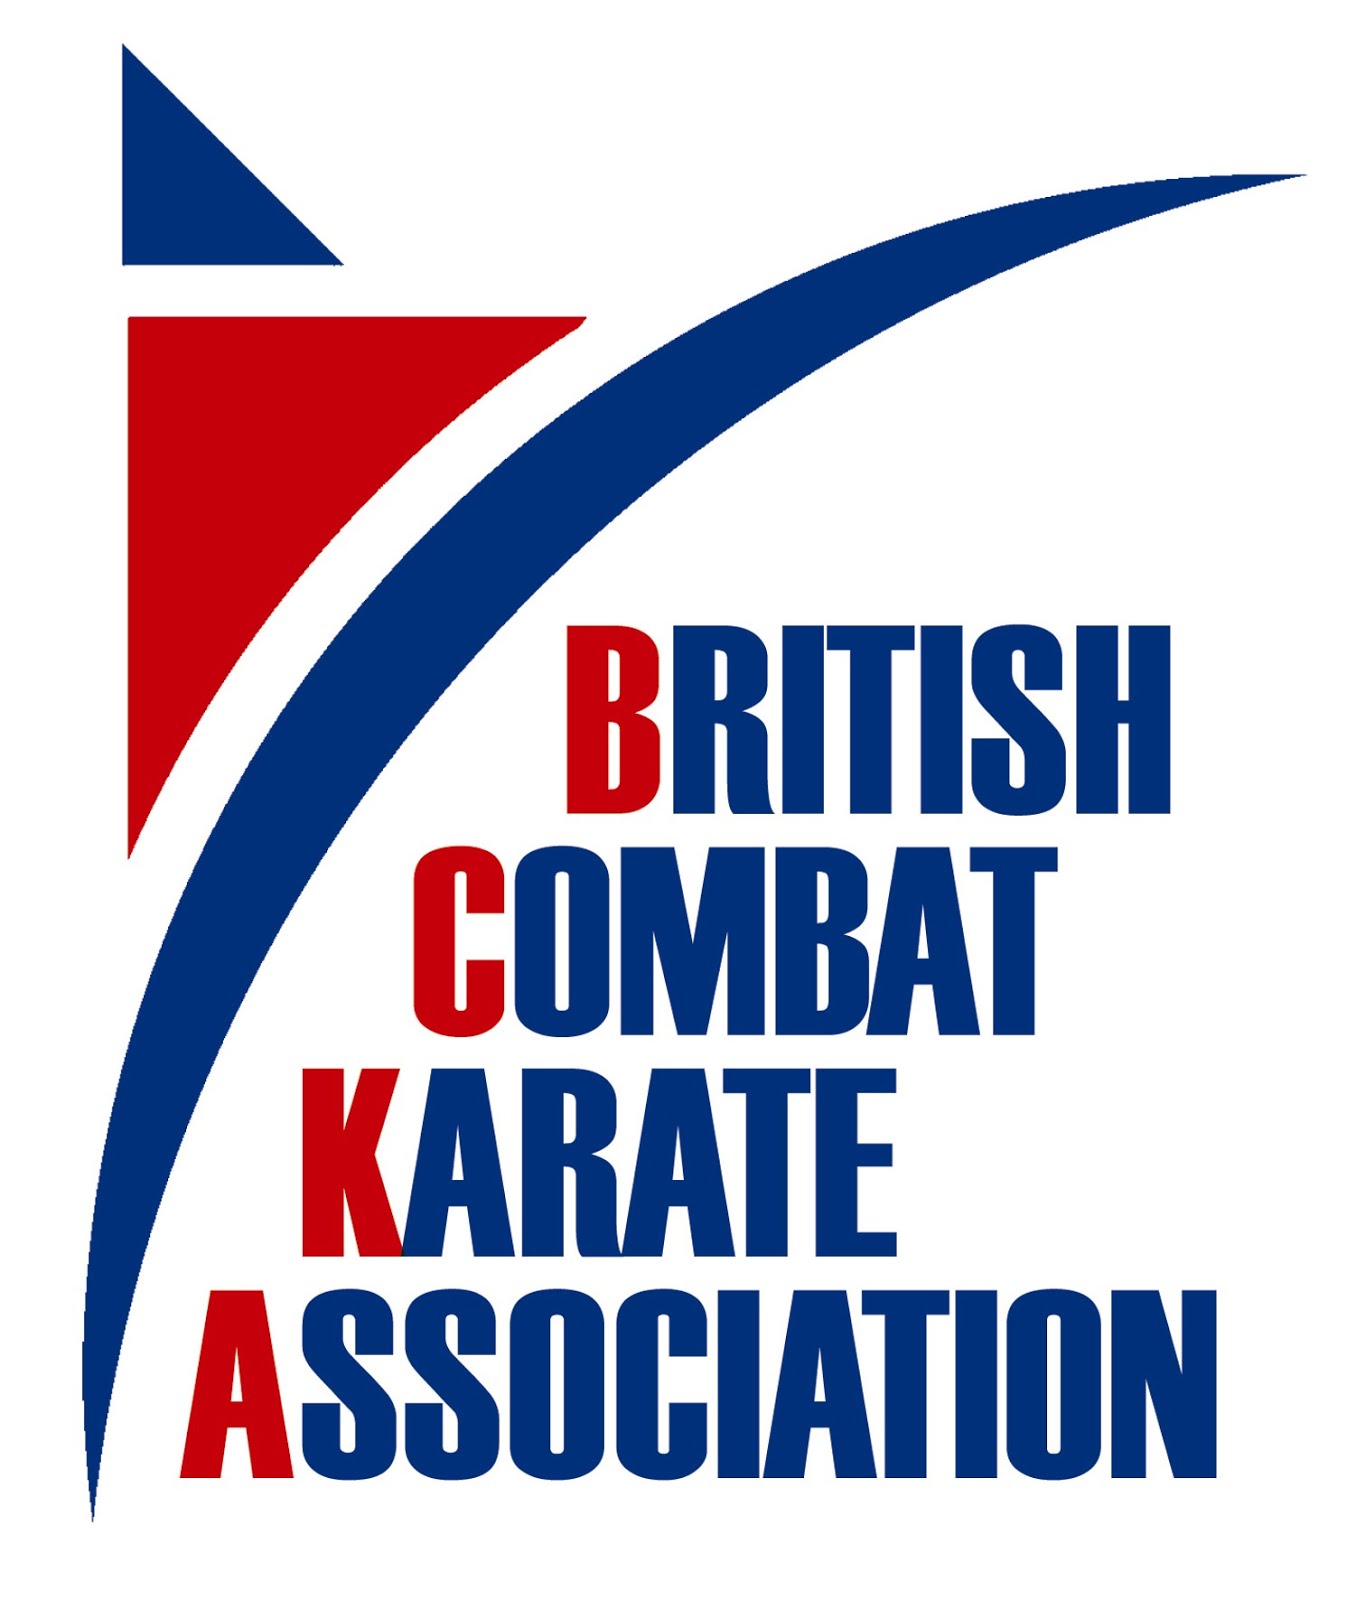 NKCA is a Member of the British Combat Karate Association